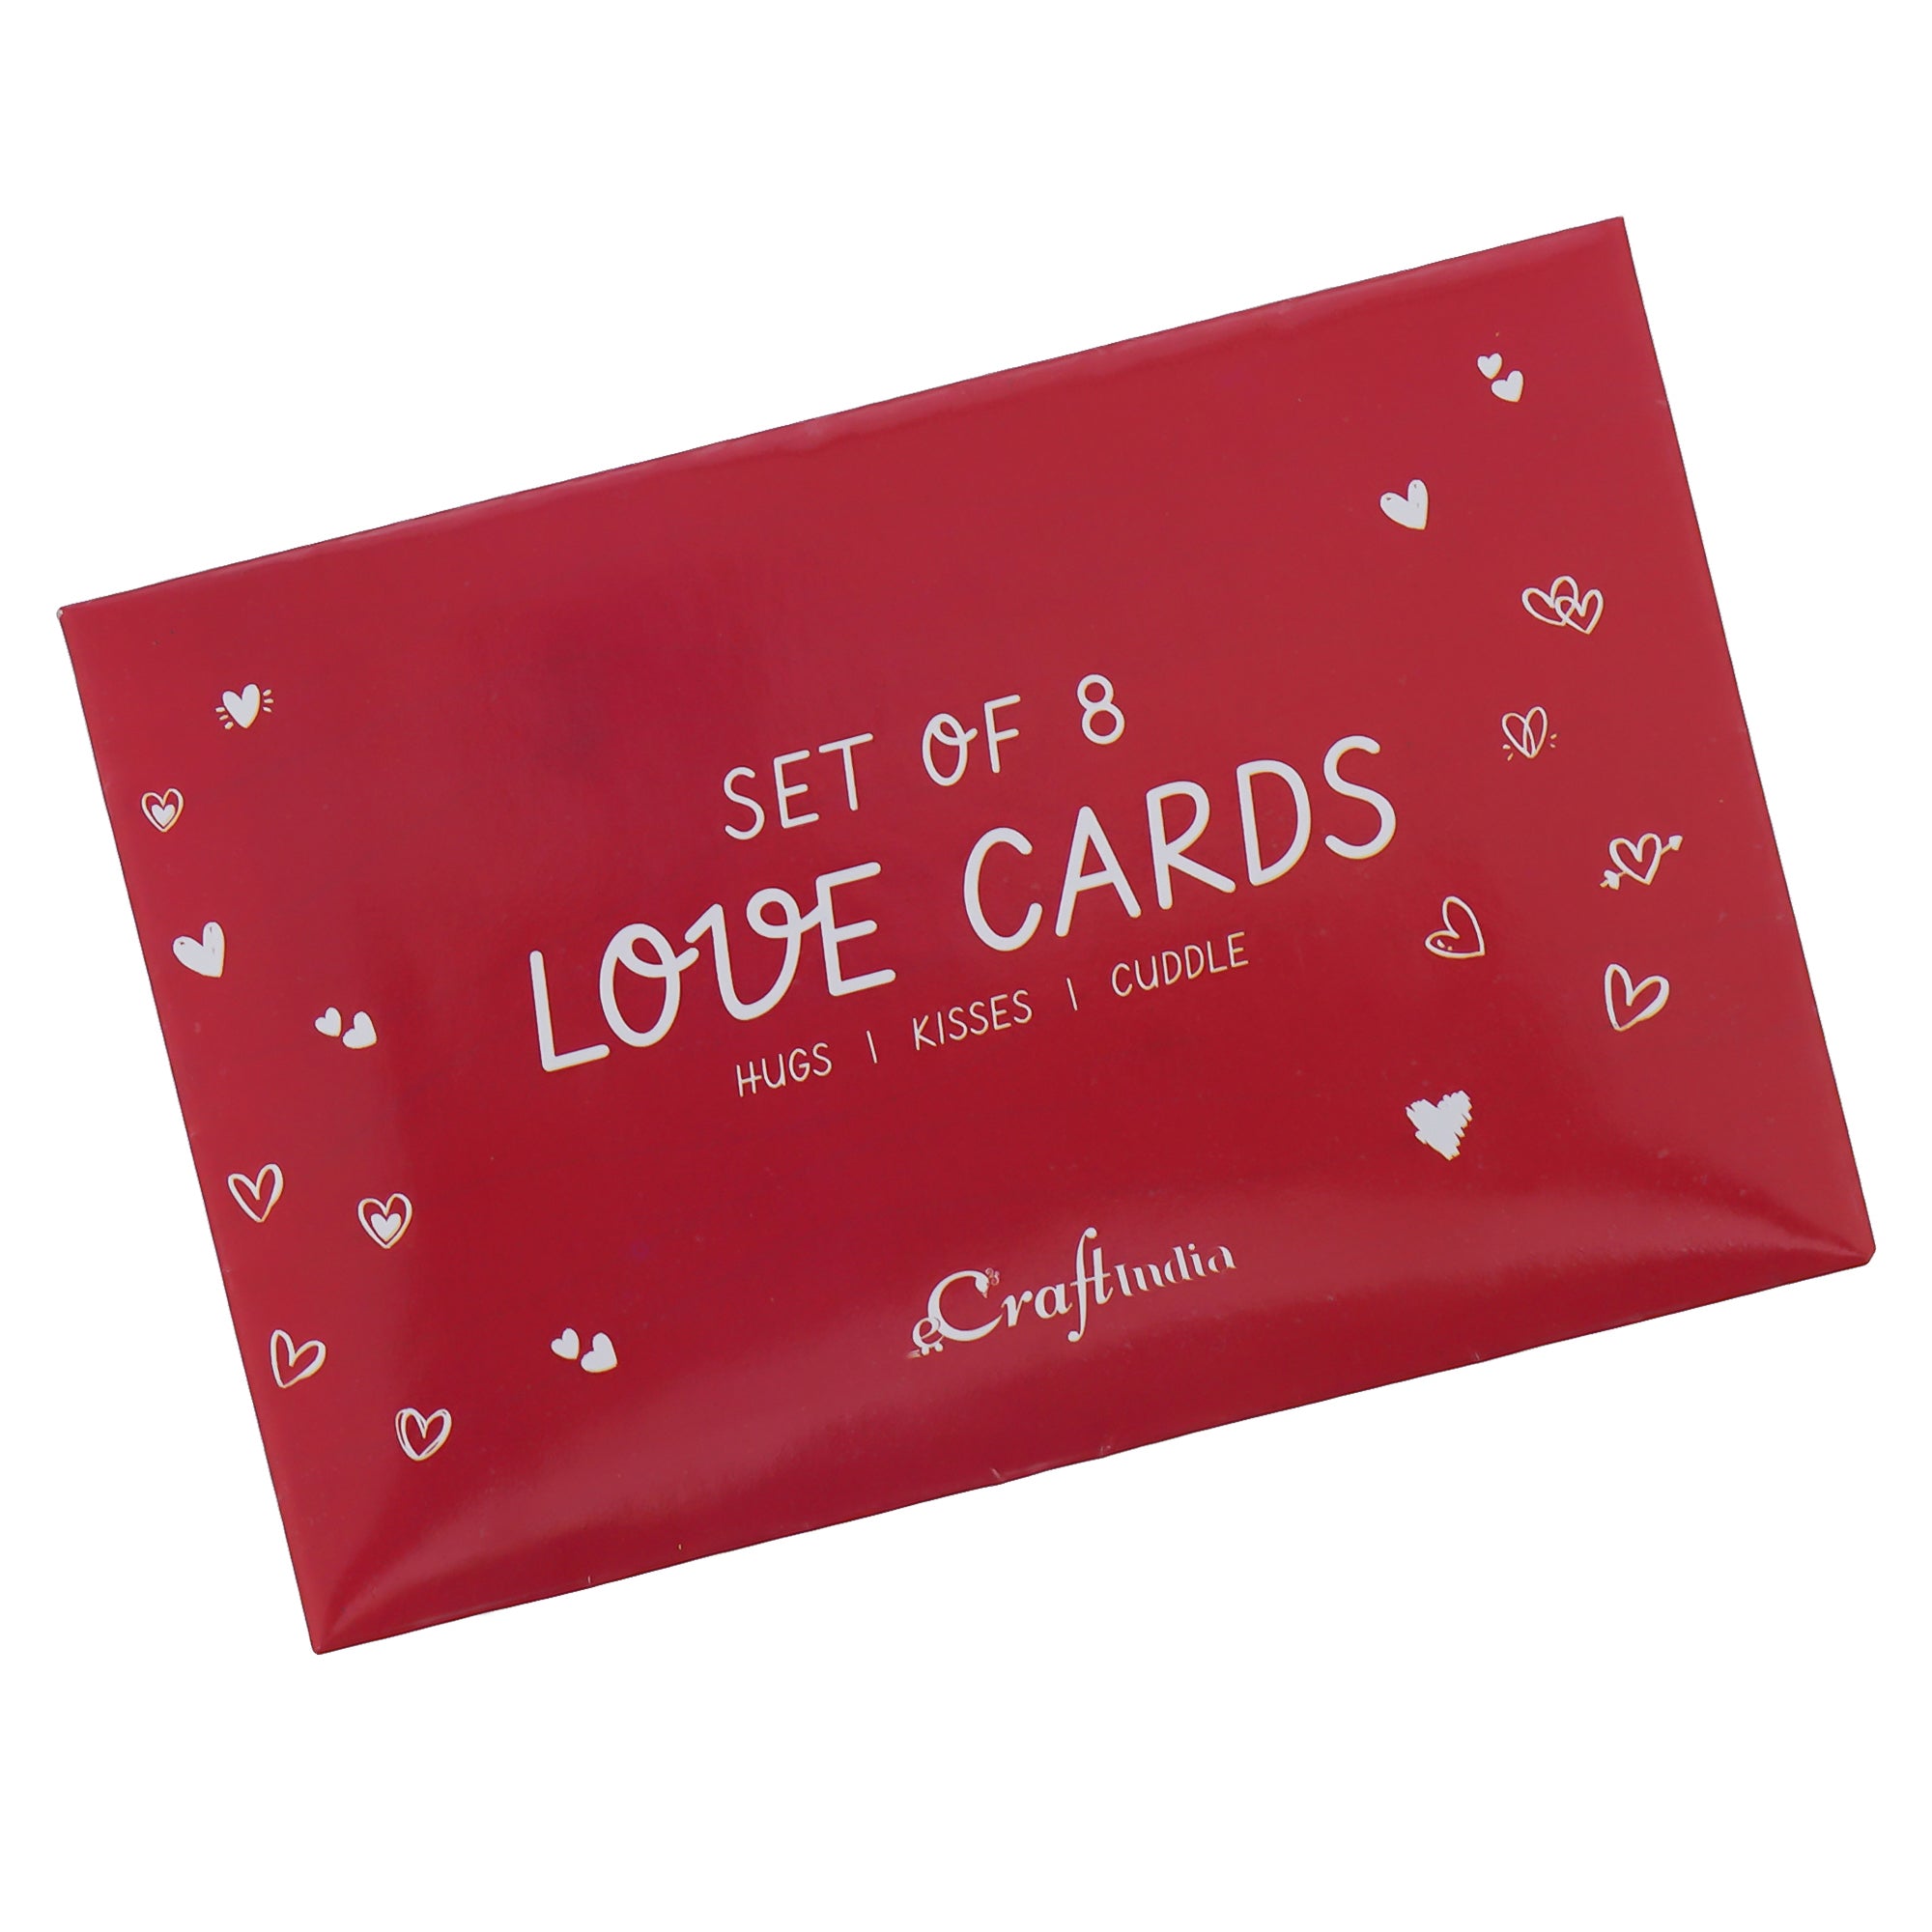 Valentine Combo of Pack of 8 Love Gift Cards, Golden Rose Gift Set, "20 Reasons Why I Love You" Printed on Little Red Hearts Decorative Wooden Gift Set Box 7